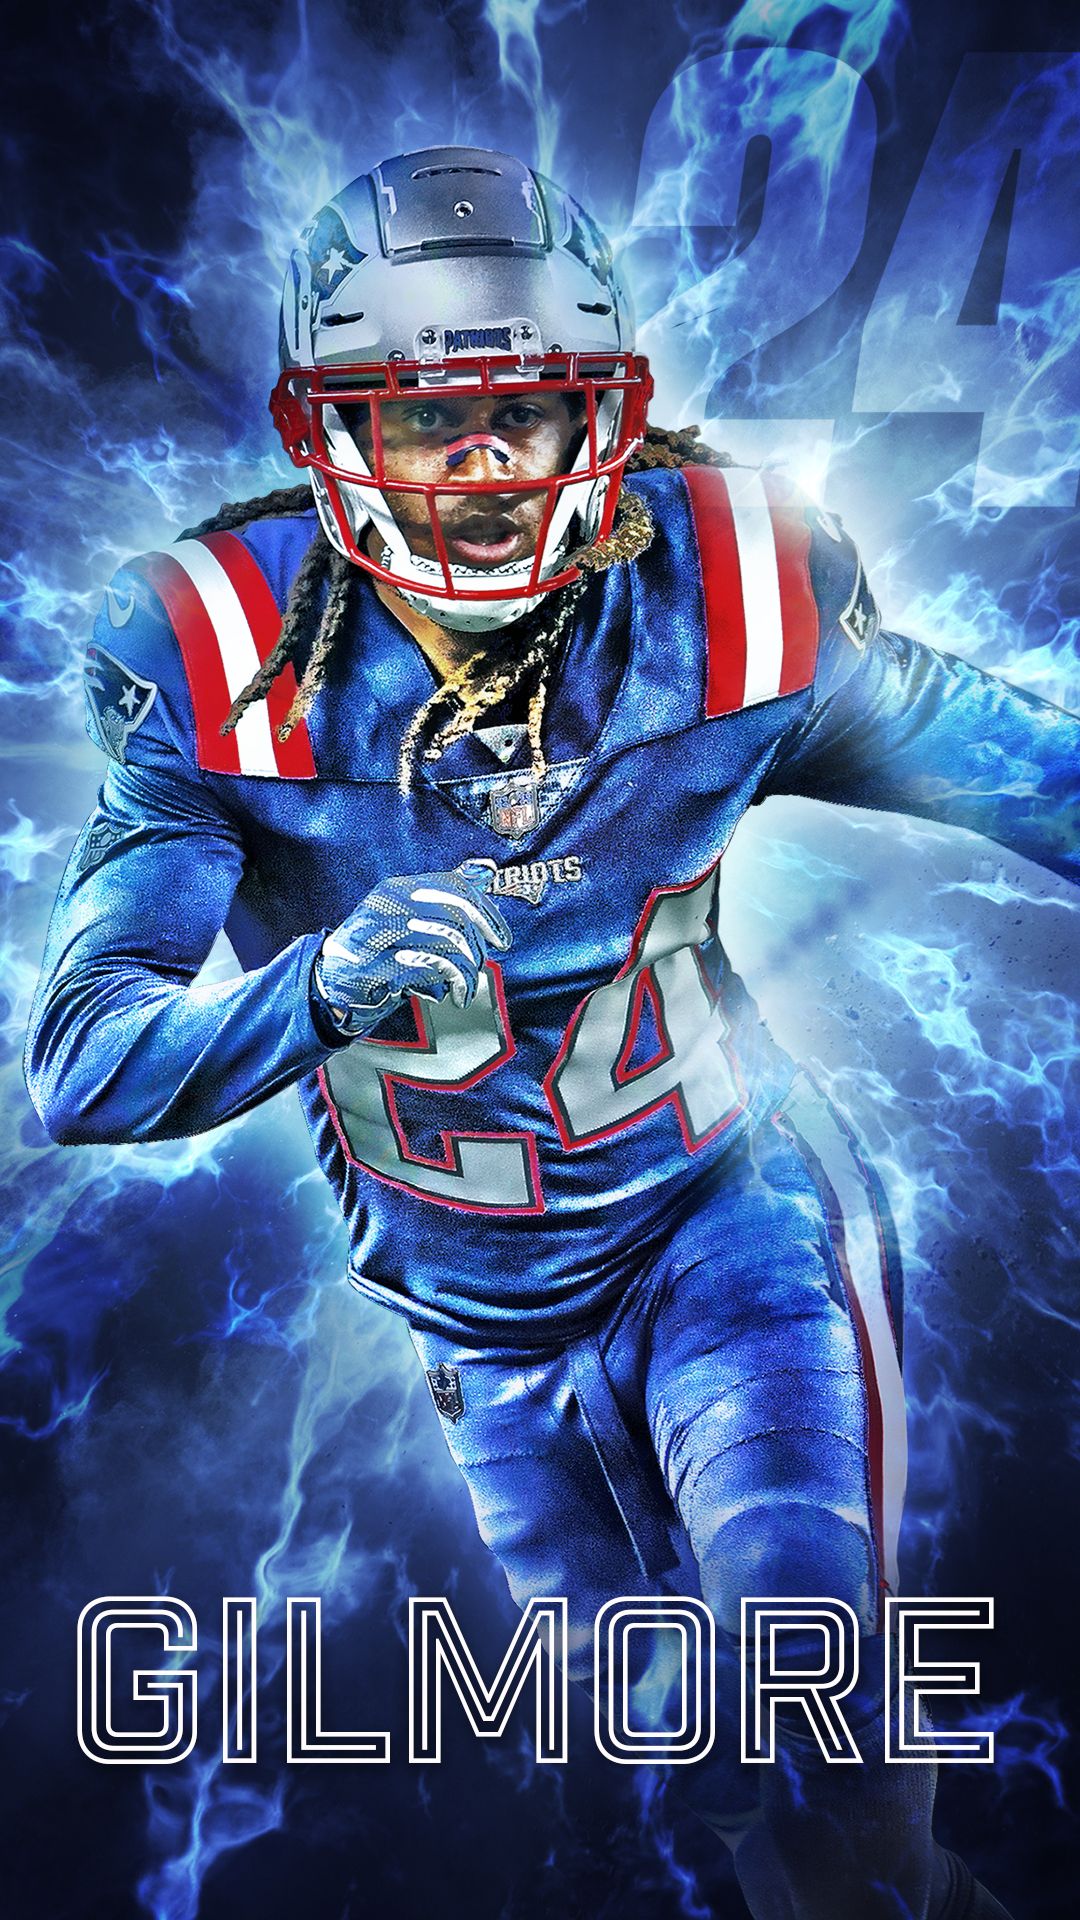 Nfl Color Rush Wallpapers